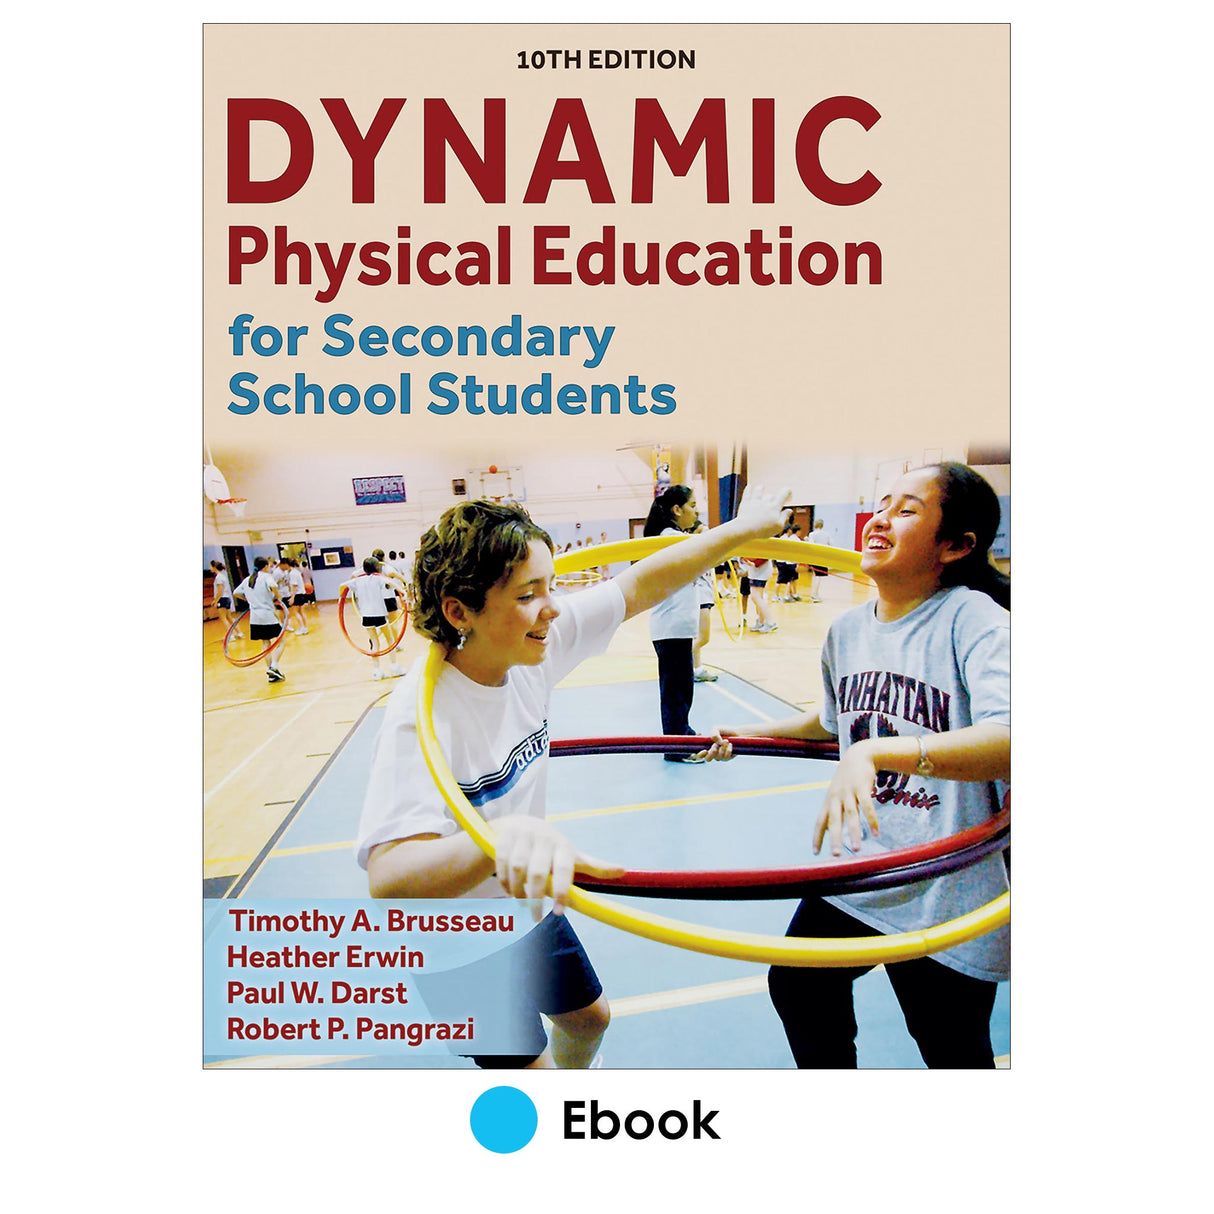 Dynamic Physical Education for Secondary School Students 10th Edition epub